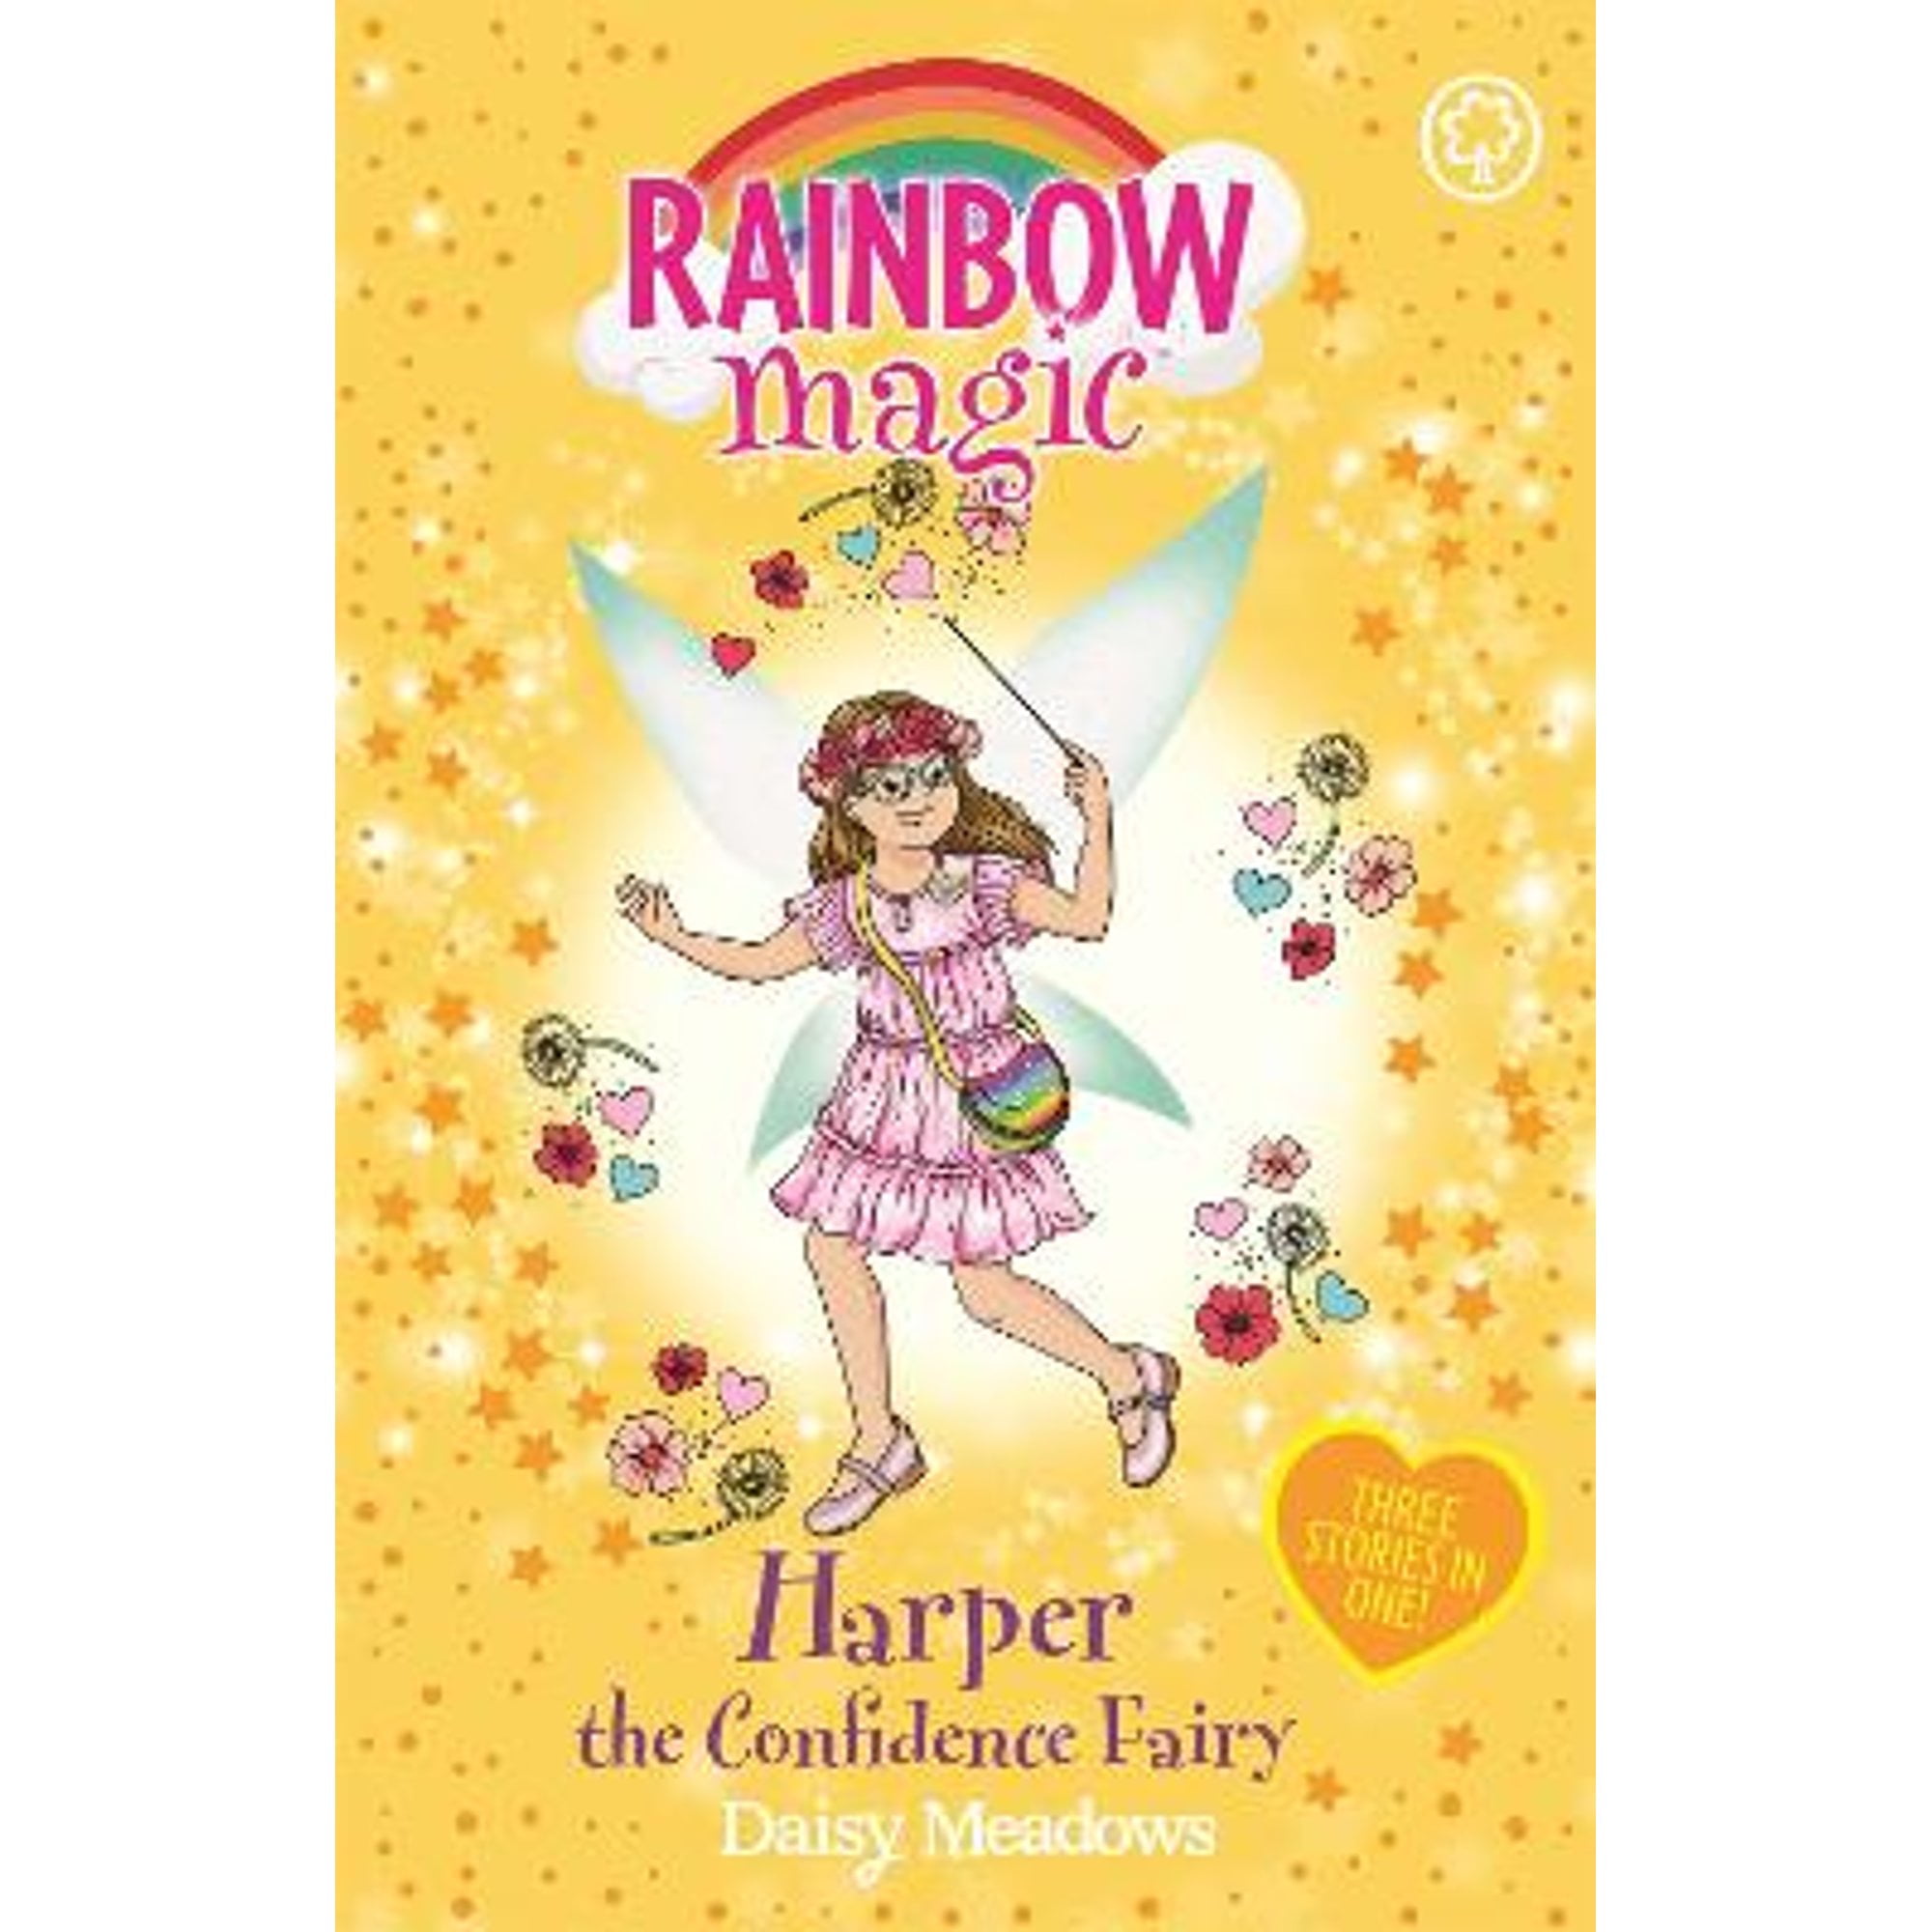 Pre-Owned Rainbow Magic: Harper the Confidence Fairy: Three Stories in One! (Paperback 9781408367094) by Daisy Meadows